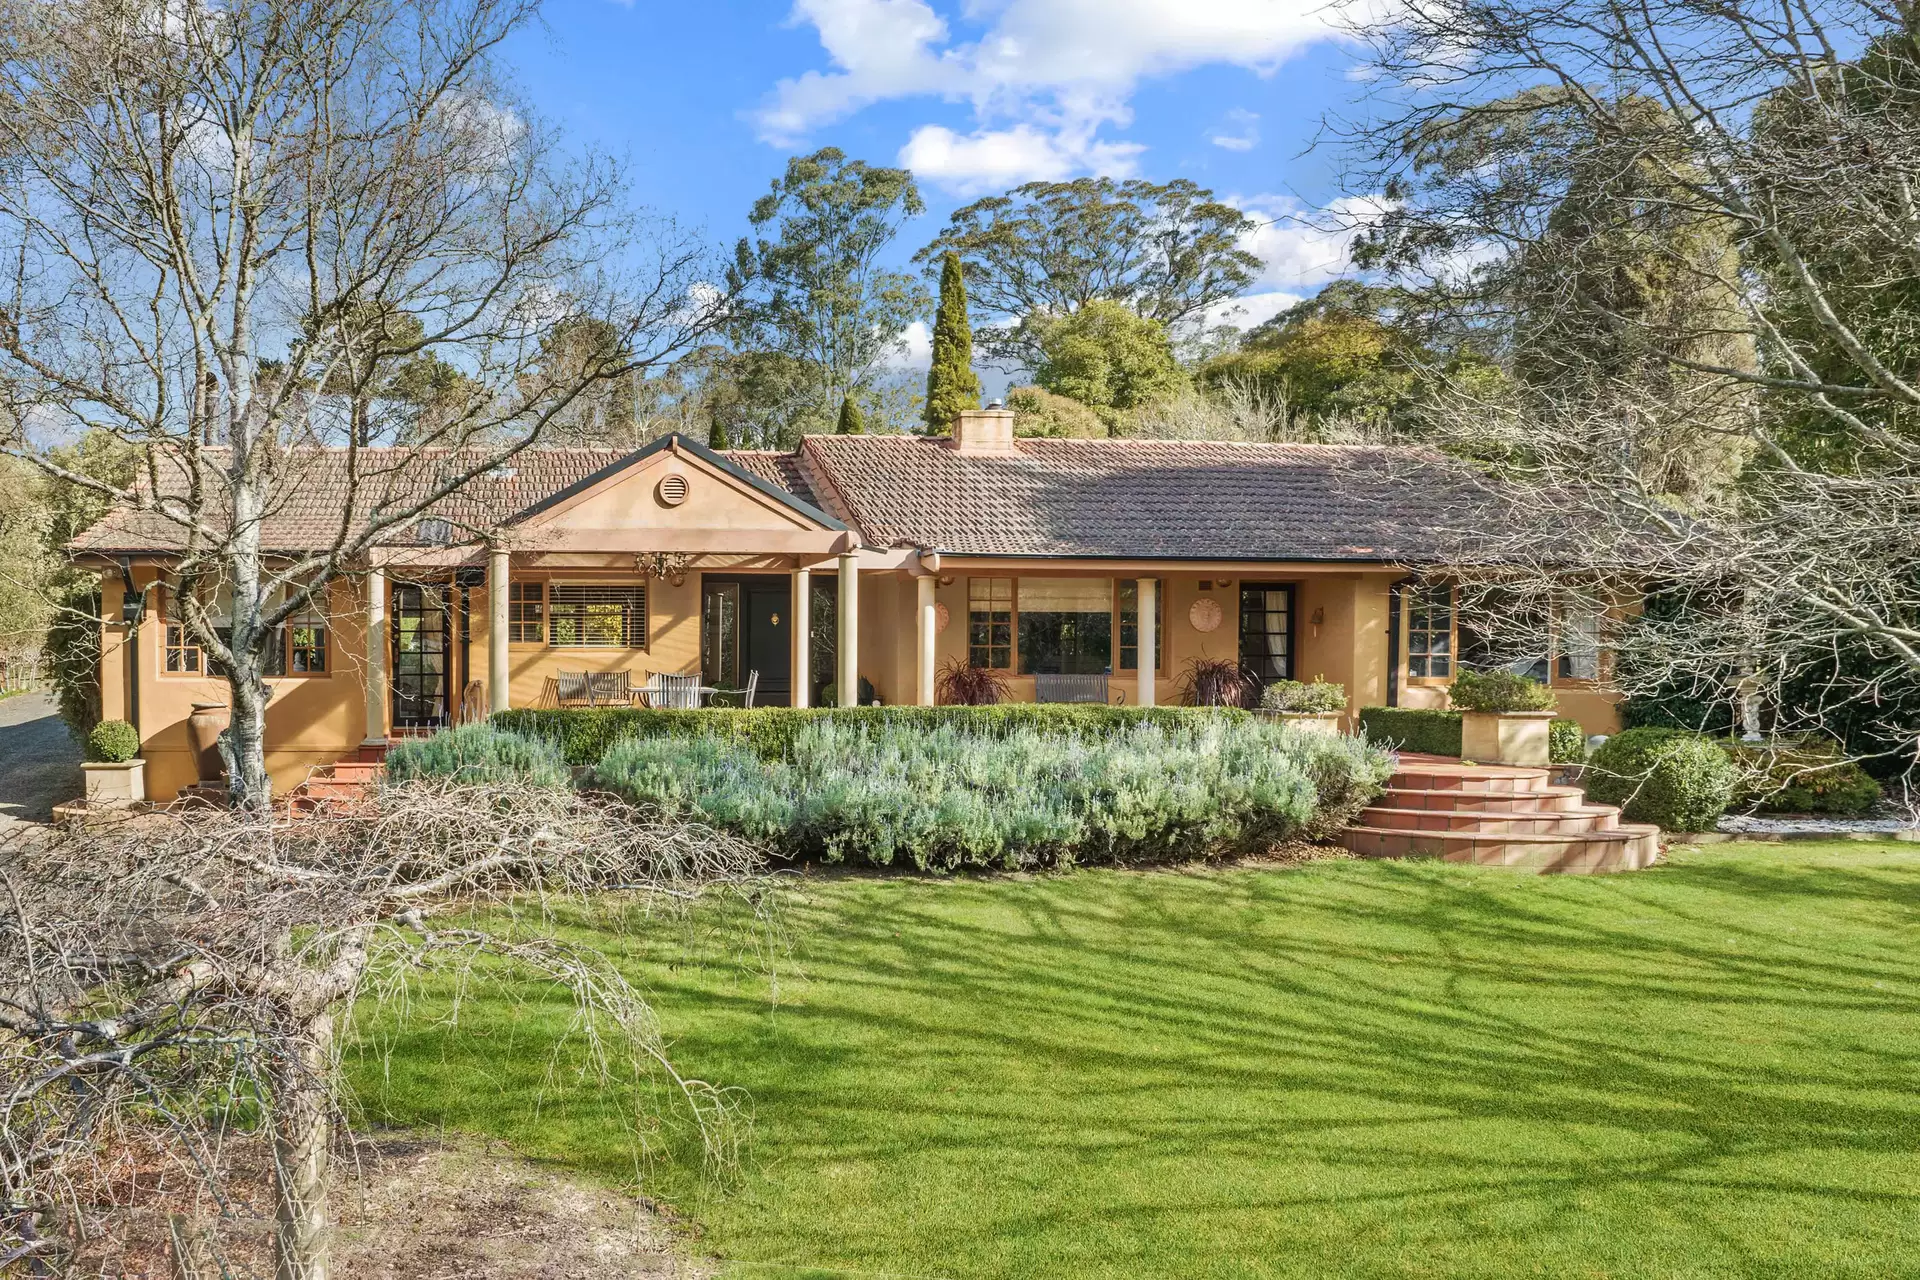 Photo #1: 38 Centennial Road, Bowral - Sold by Drew Lindsay Sotheby's International Realty